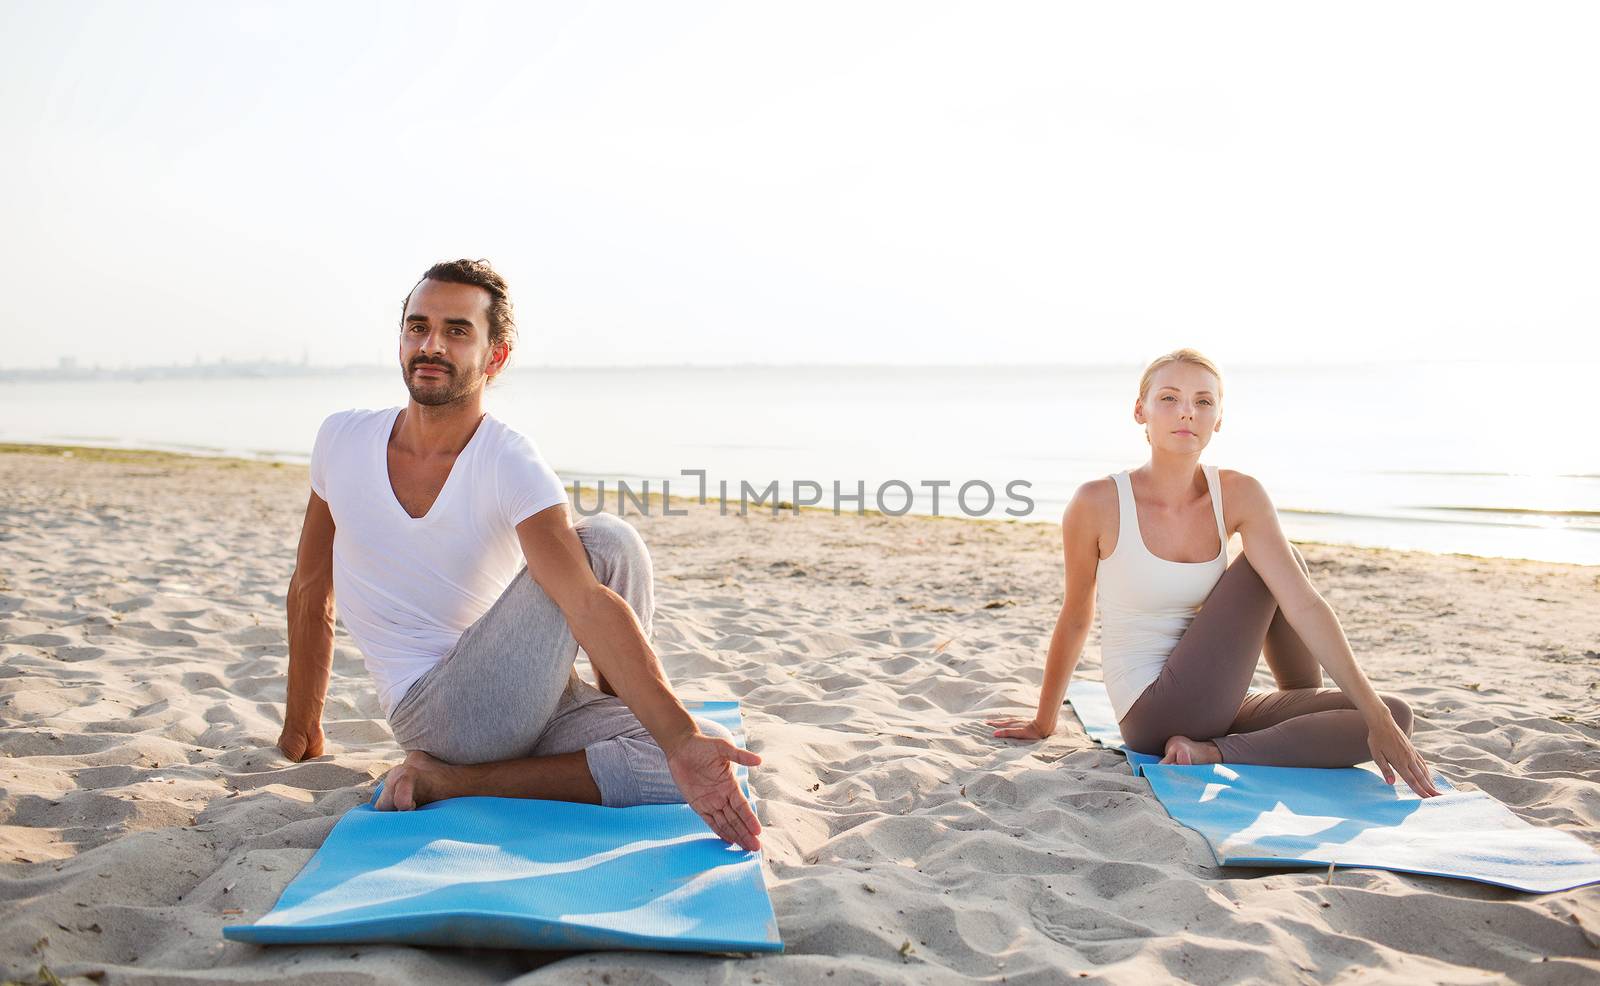 fitness, sport, friendship and lifestyle concept - couple making yoga exercises sitting on mats outdoors